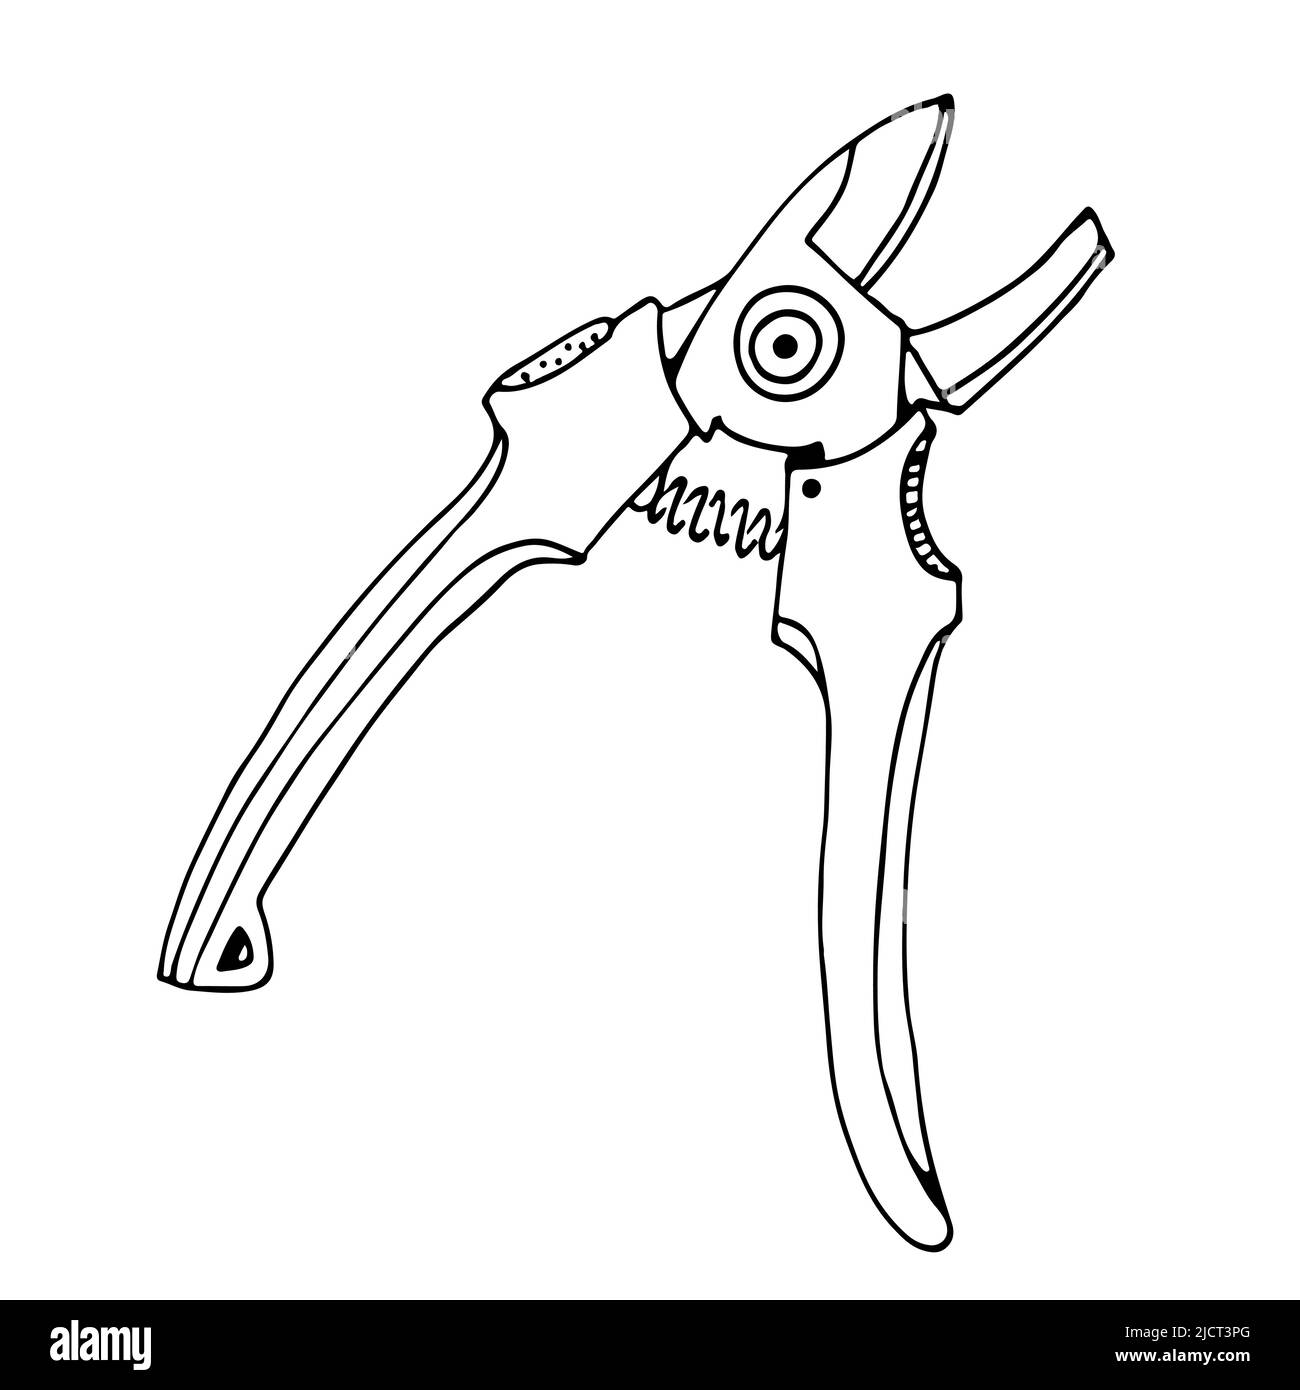 Secateurs, garden tool, hand drawn vector illustration, isolated on a white background Stock Vector